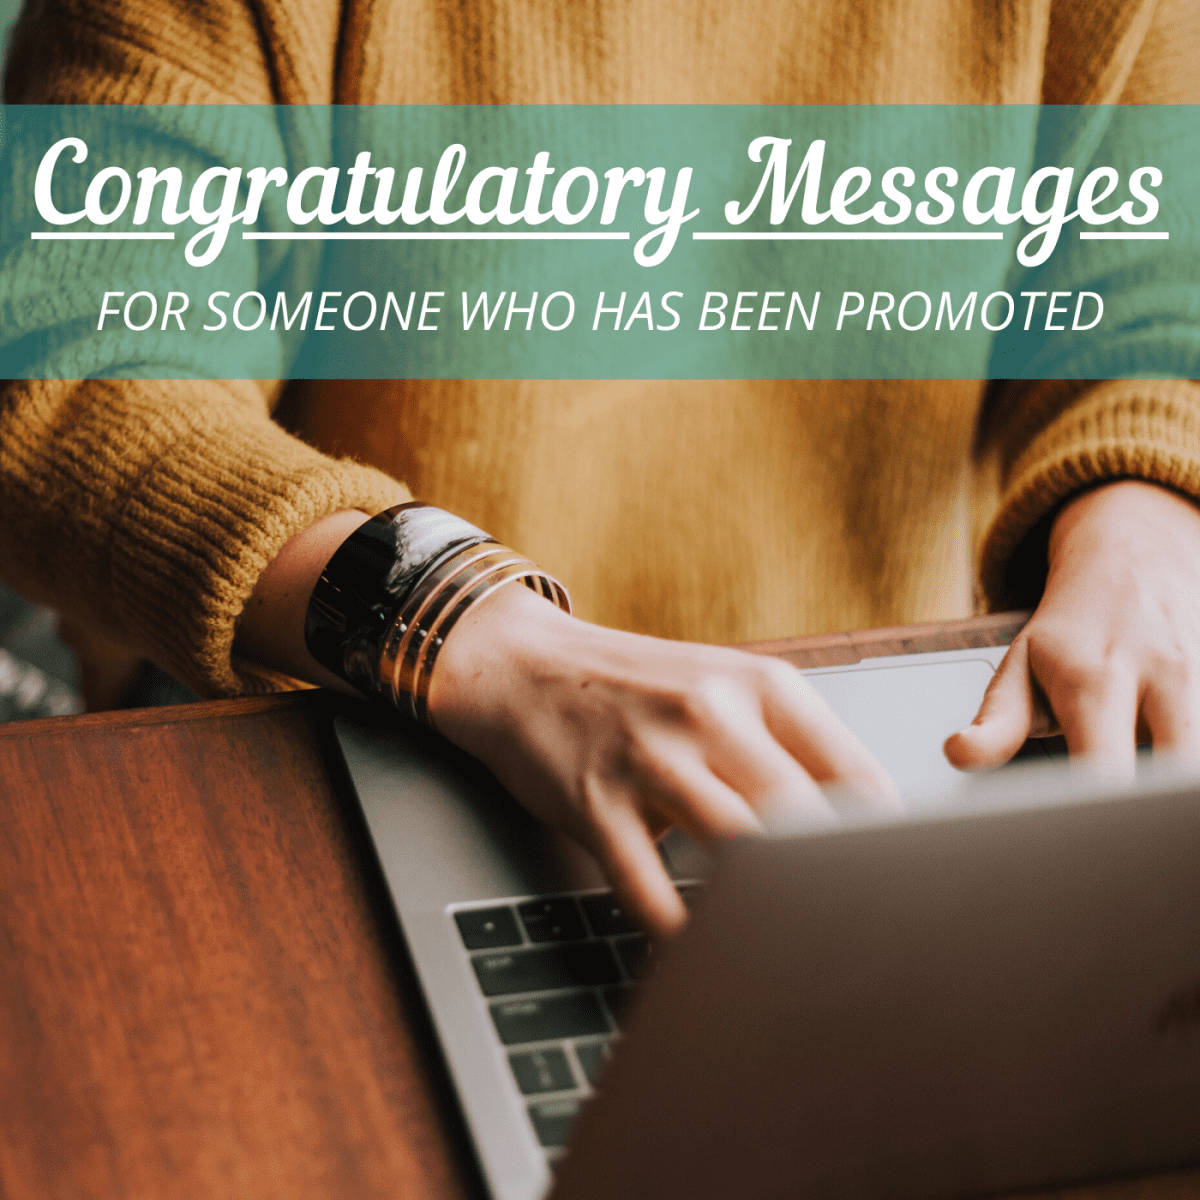 50 Congratulation Messages for a New Promotion - Holidappy